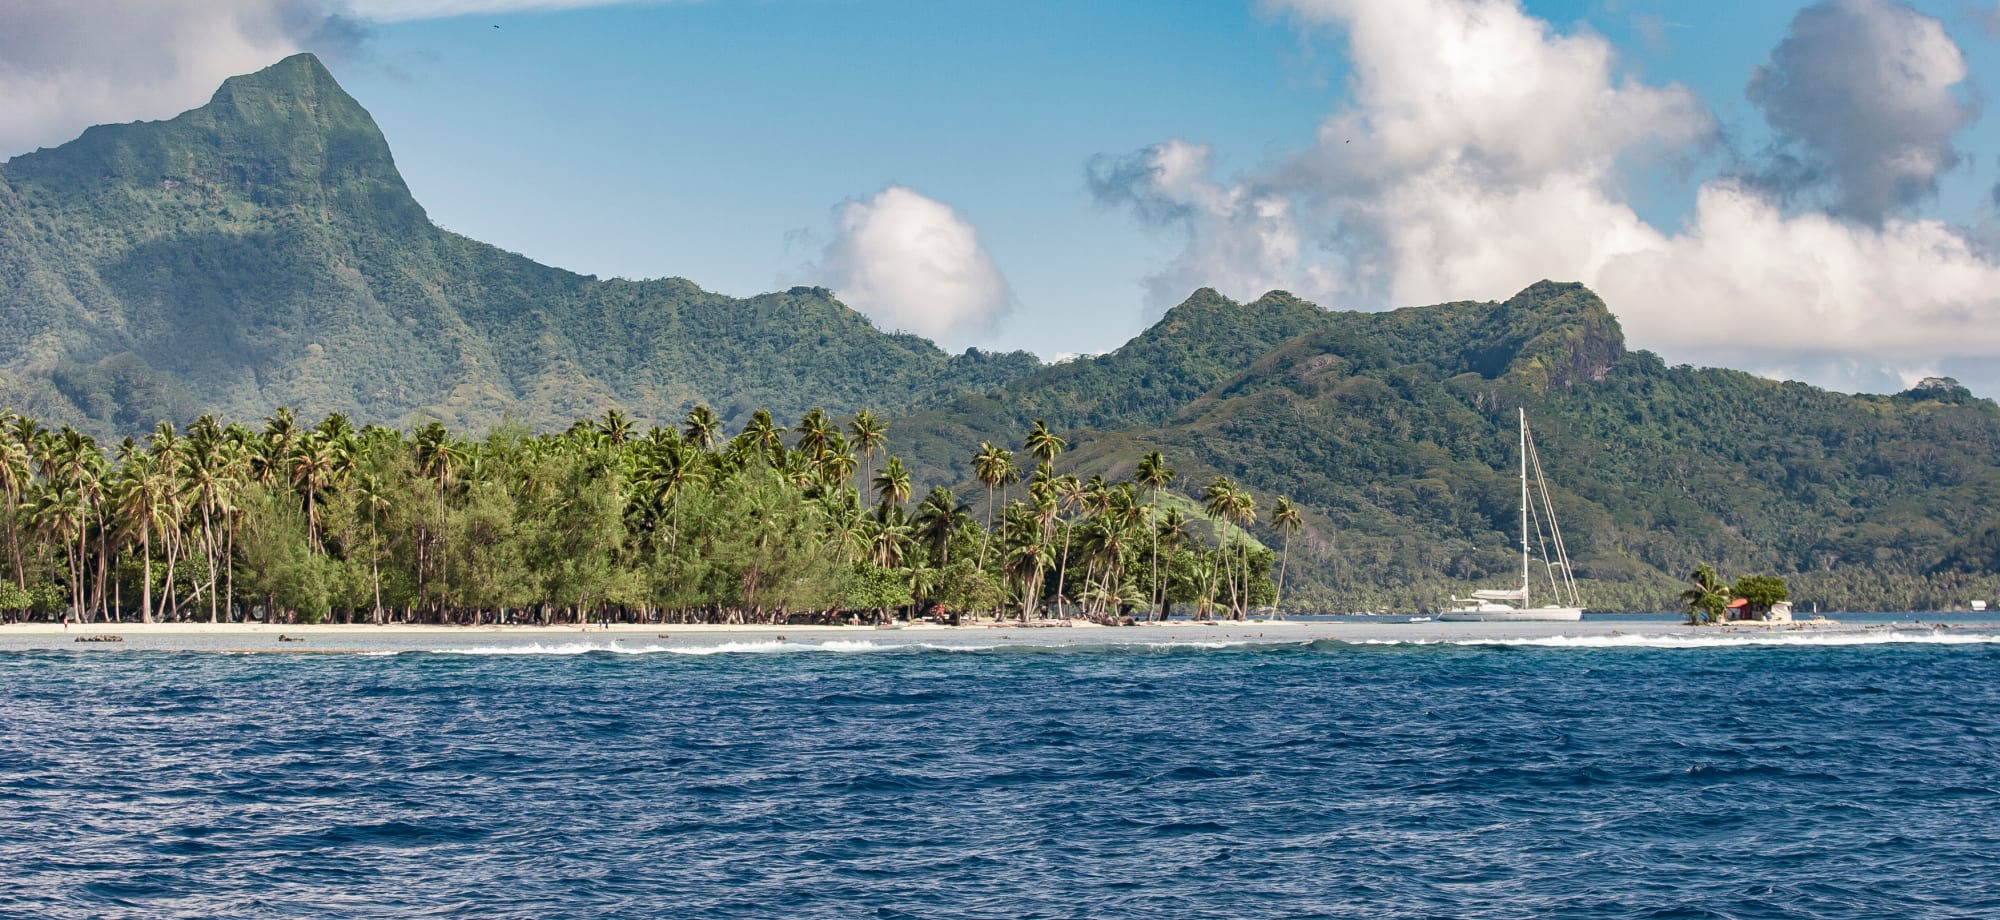 Approaching Raiatea Island from sea on a boat, French Polynesia, Society Islands, south pacific